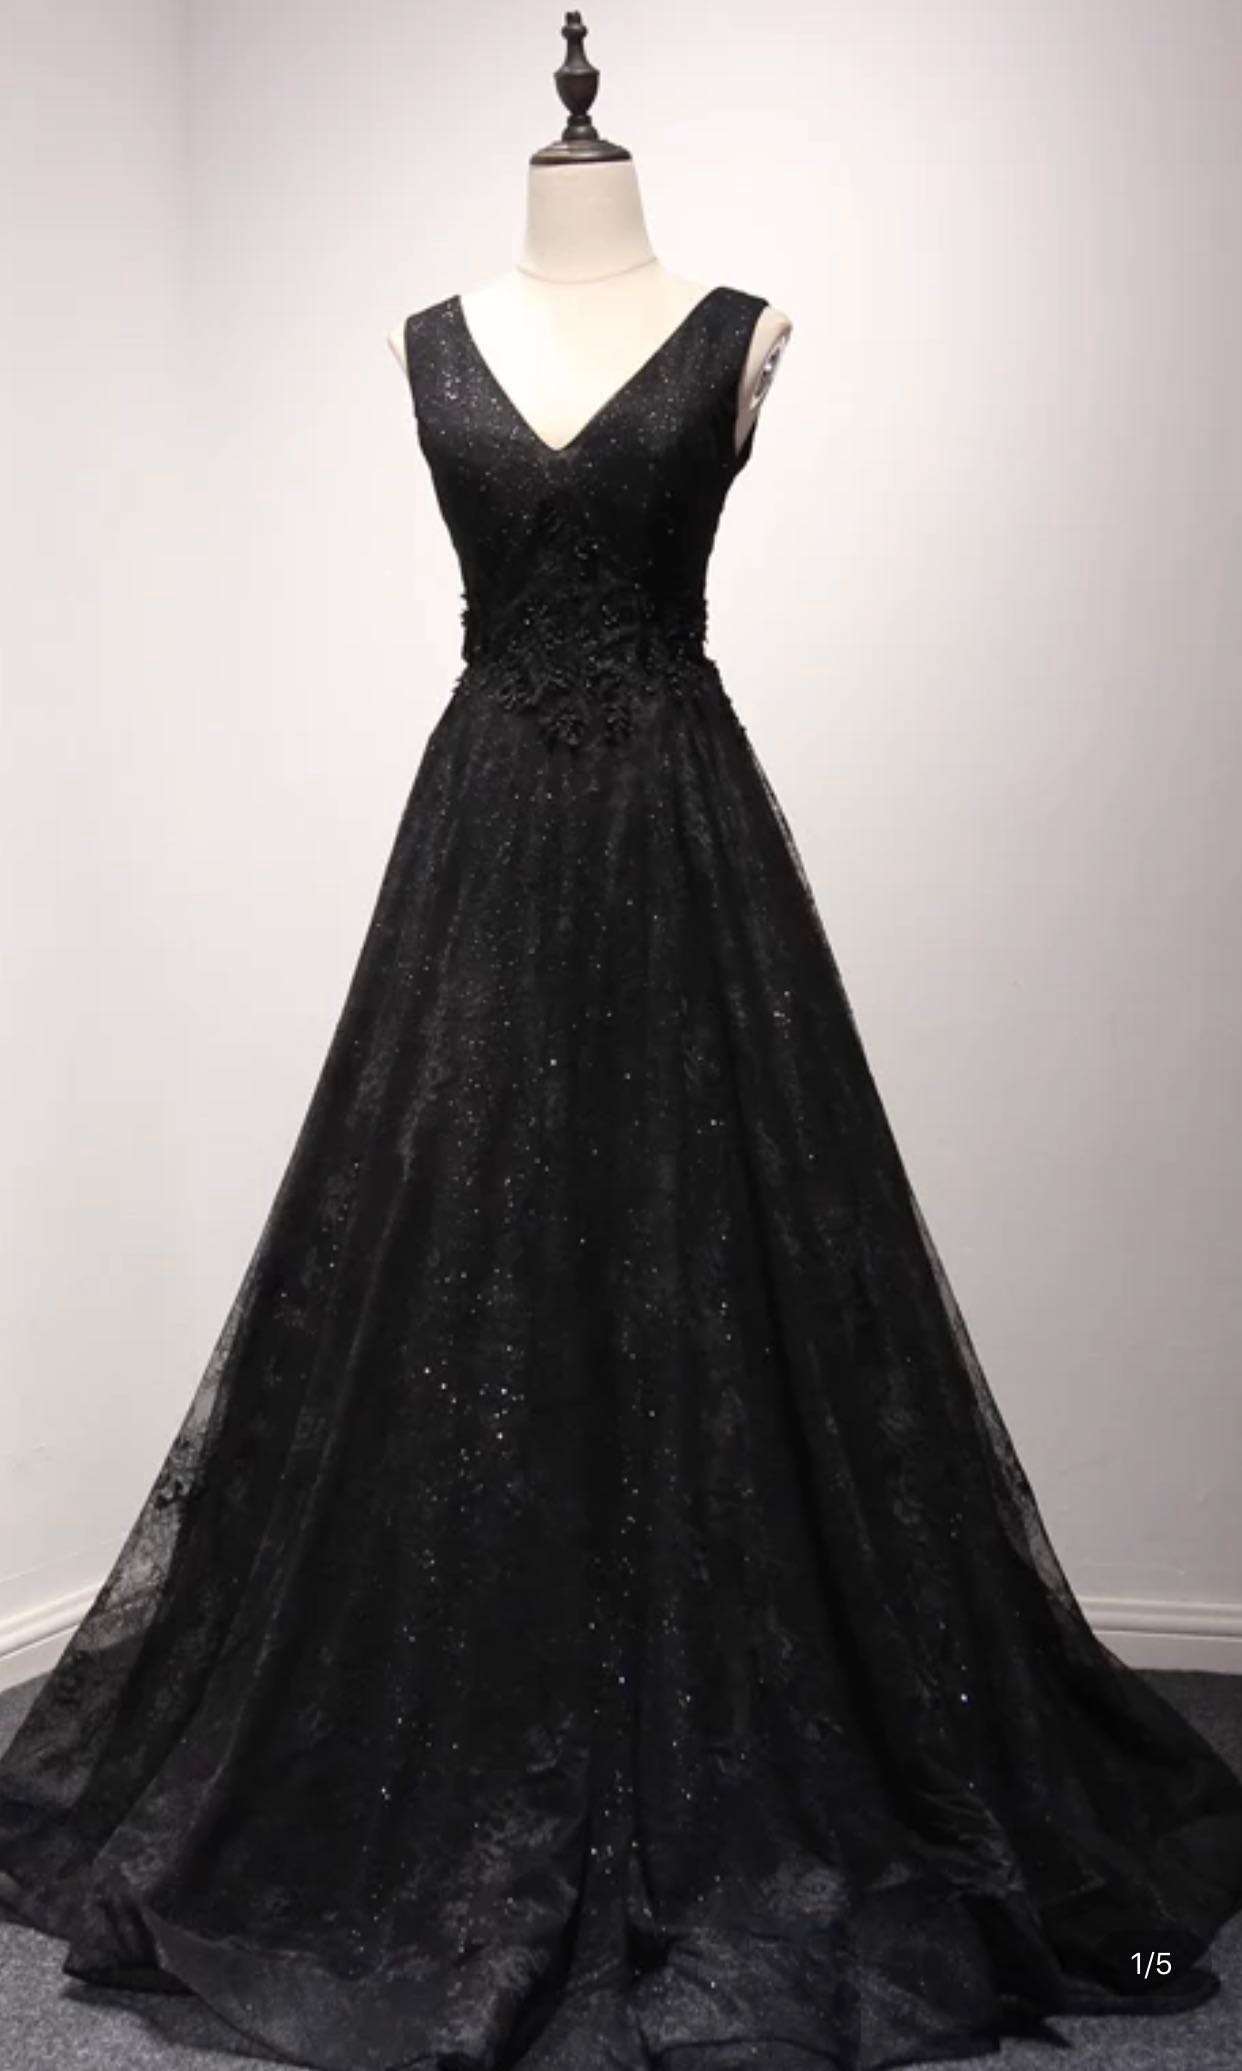 Joella - Black Sheer Glitter Gown with Deep Plunge Neckline & Low Back |  High fashion dresses, Gowns, Event dresses